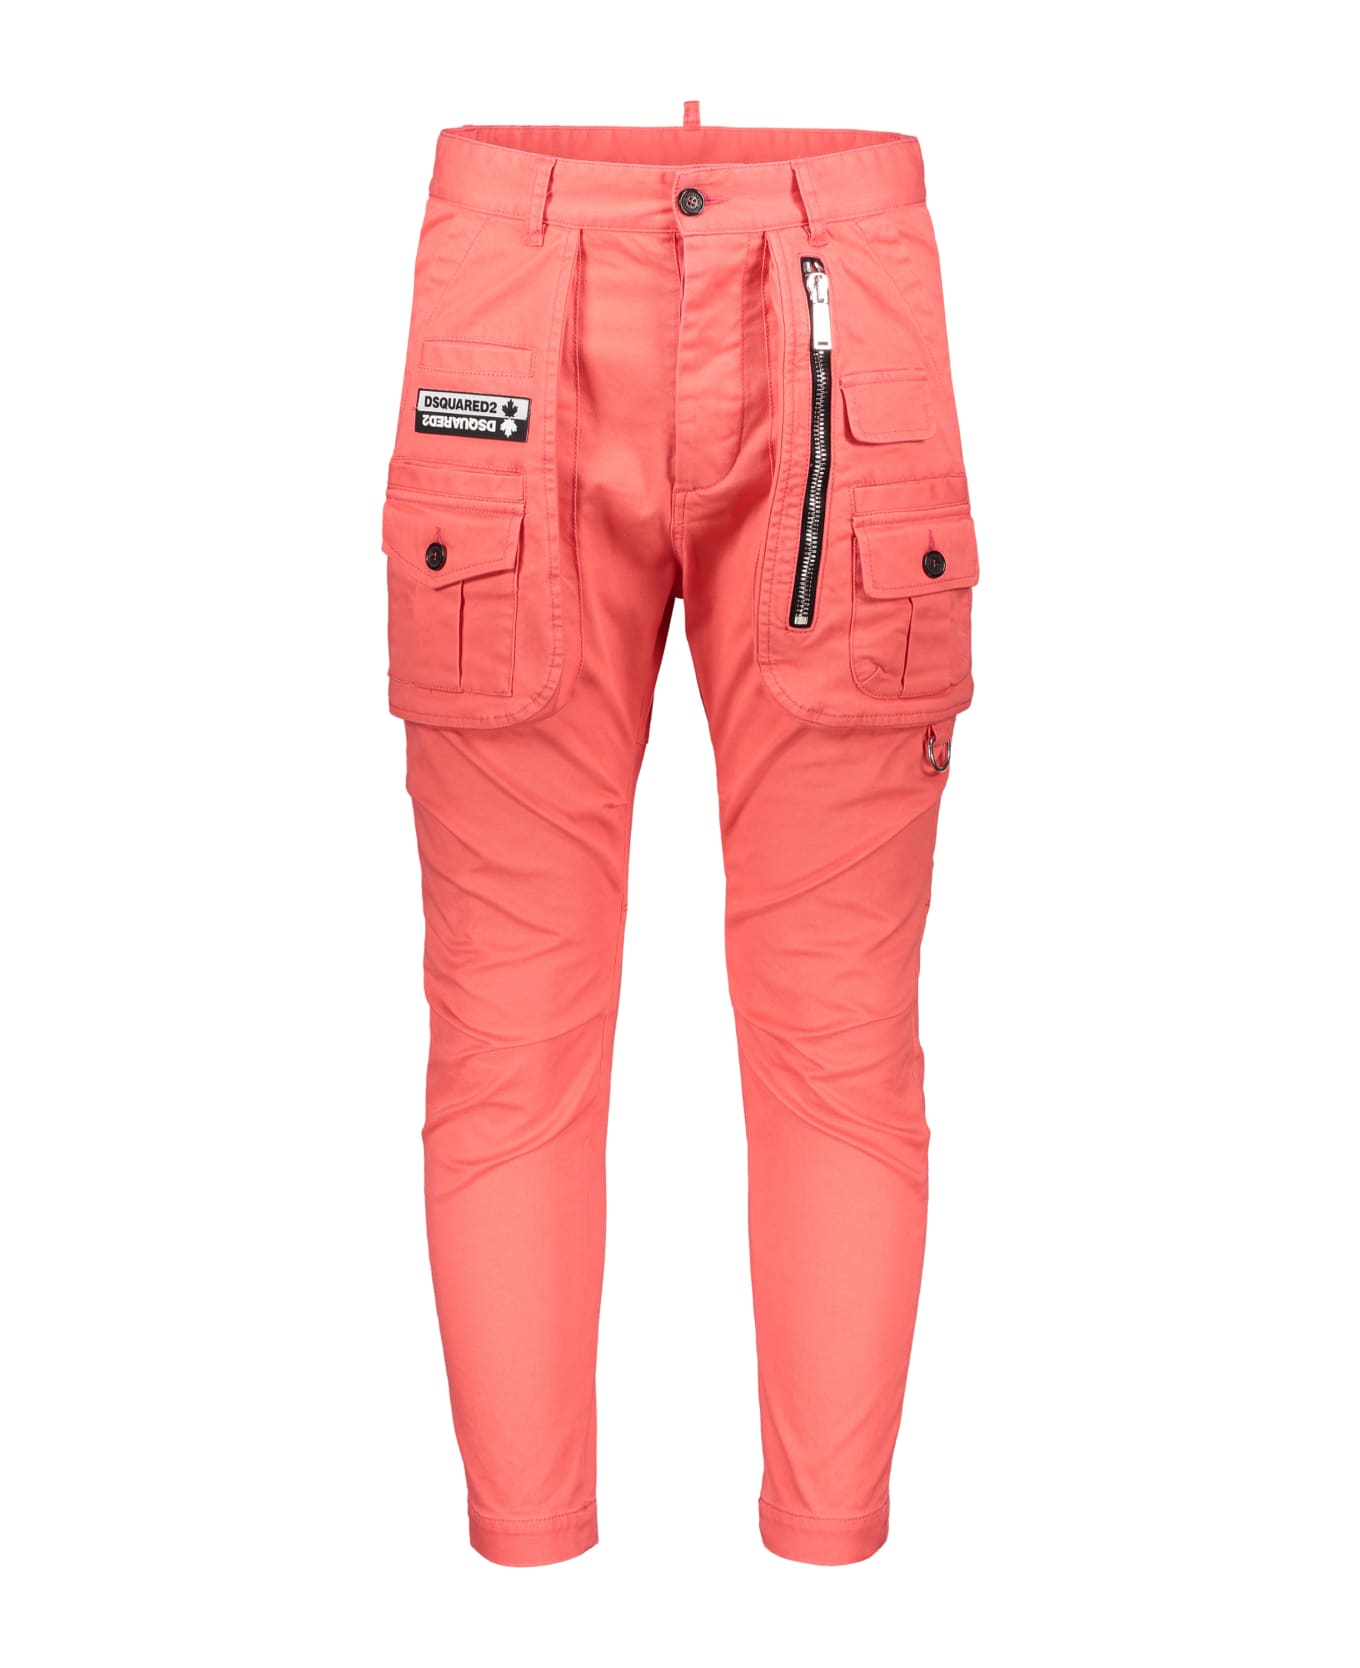 Dsquared2 Sexy Cargo Trouser - Pink ボトムス